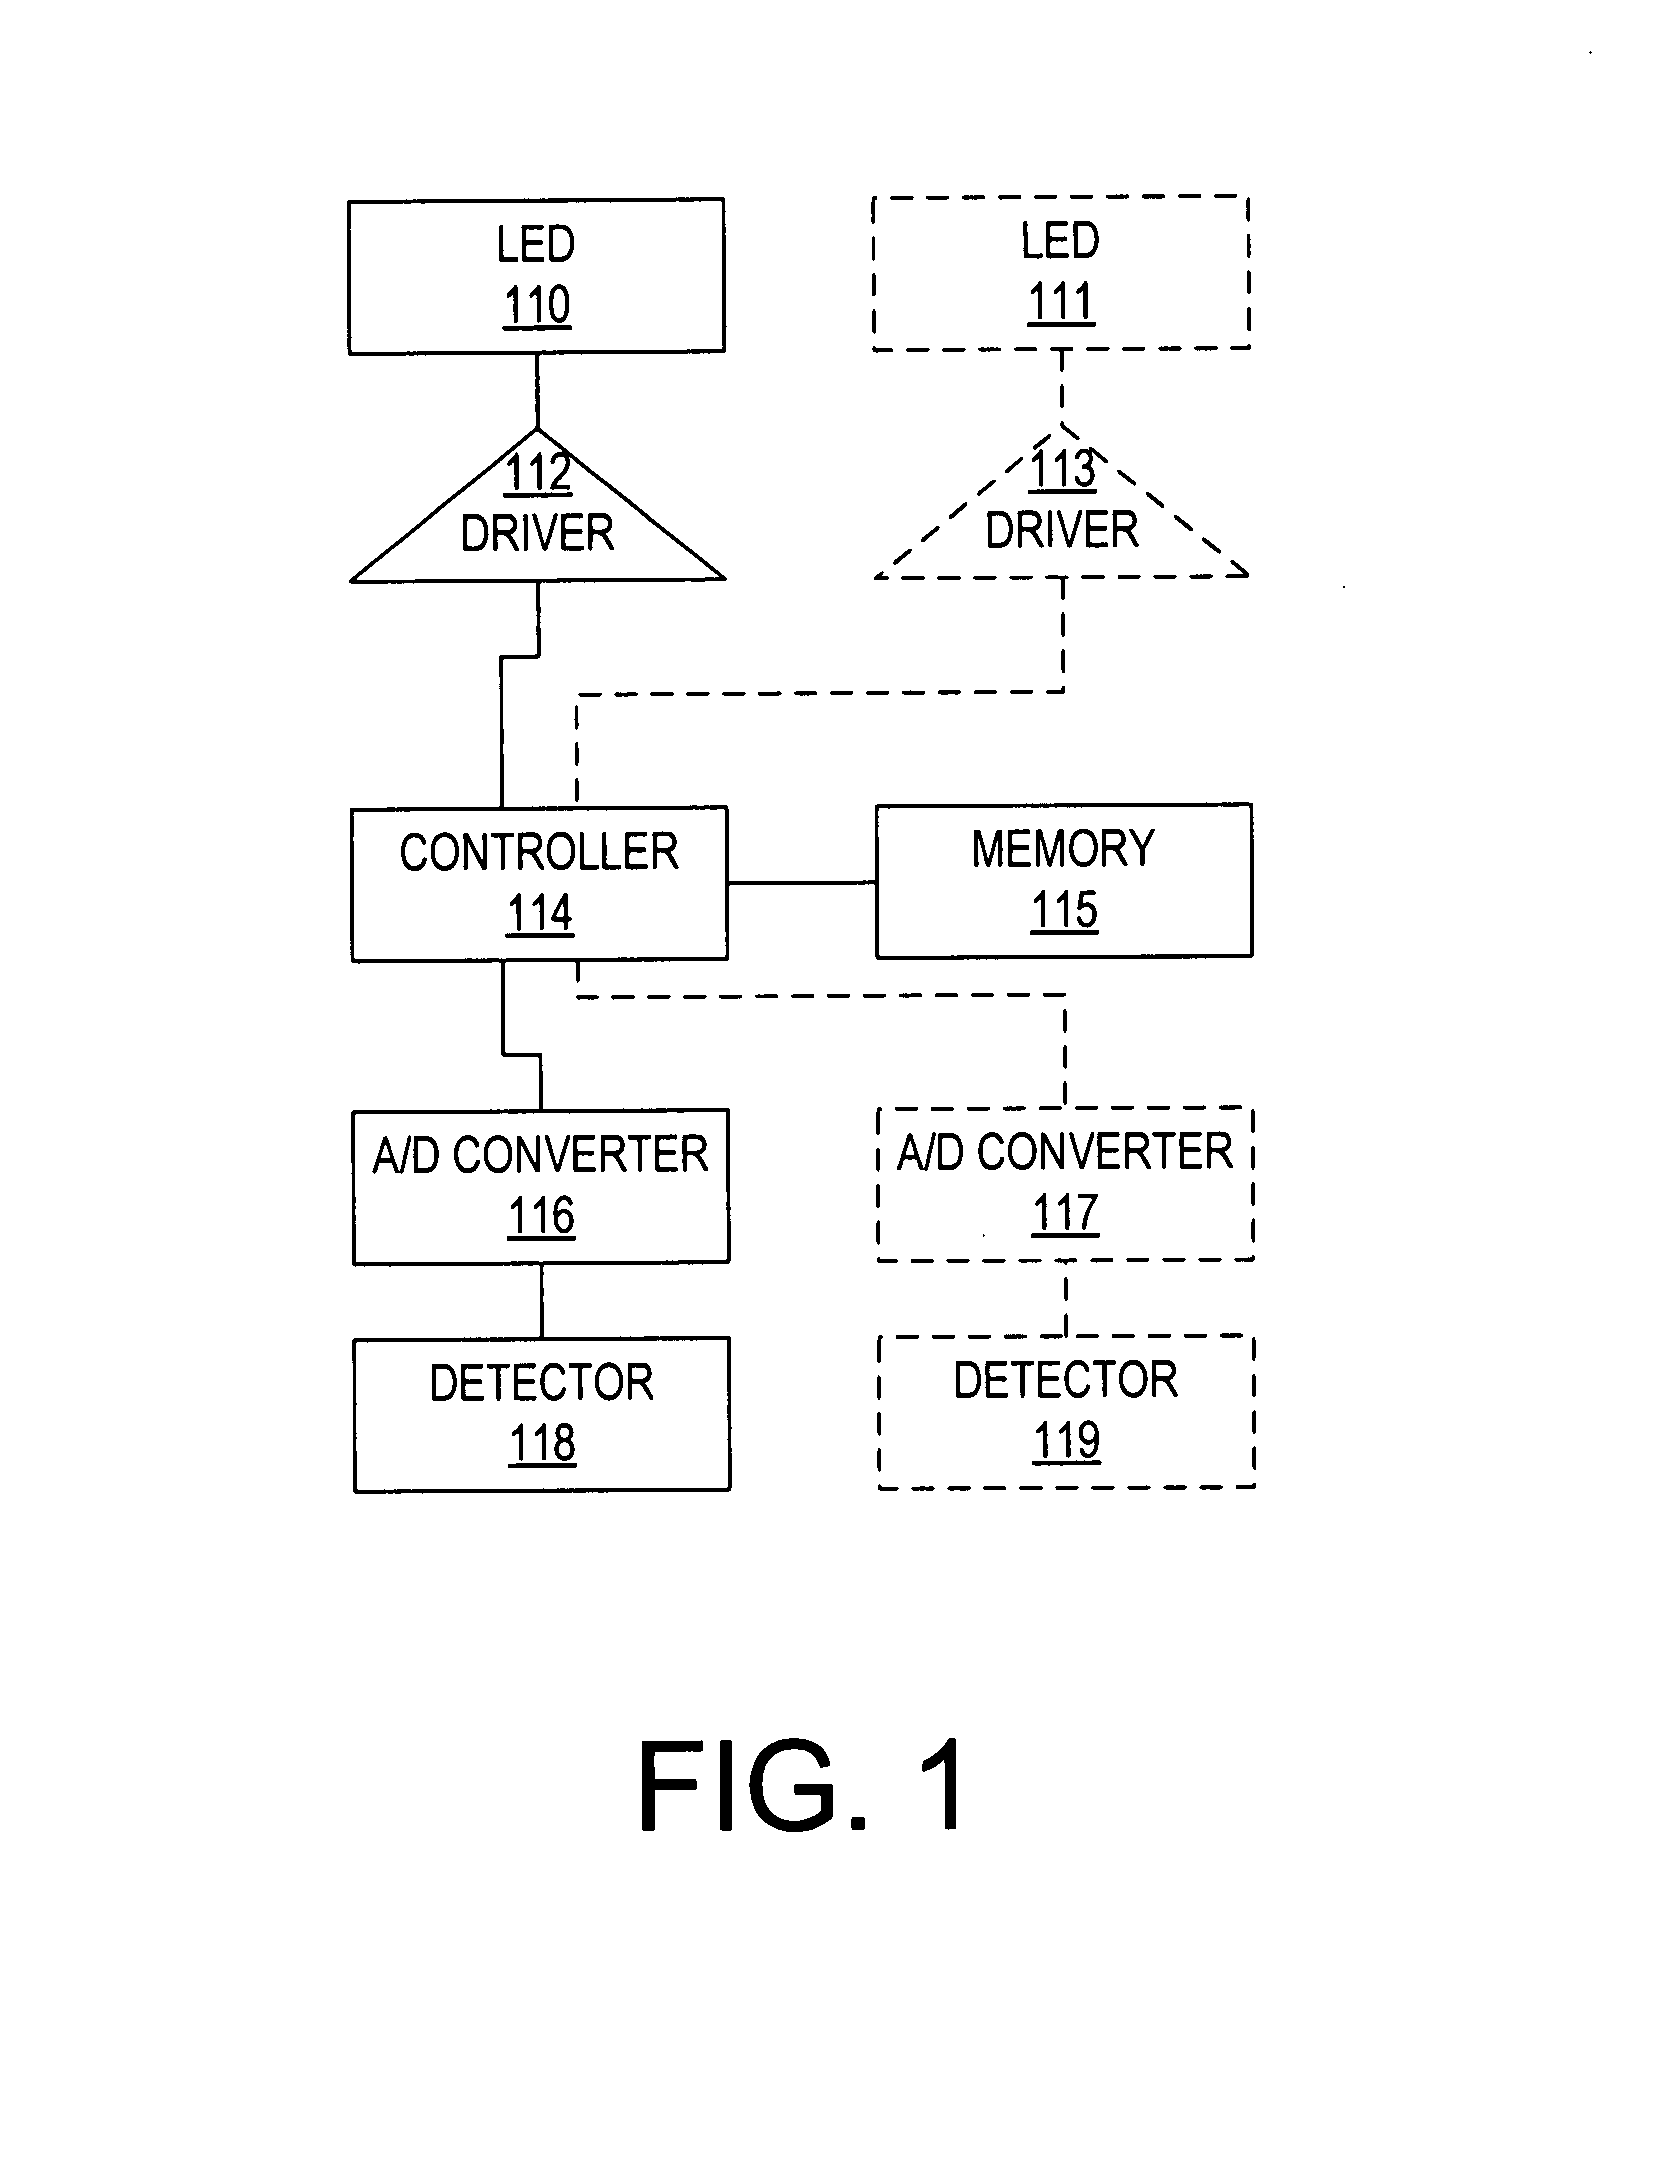 System, method and apparatus for communicating information from a personal electronic device